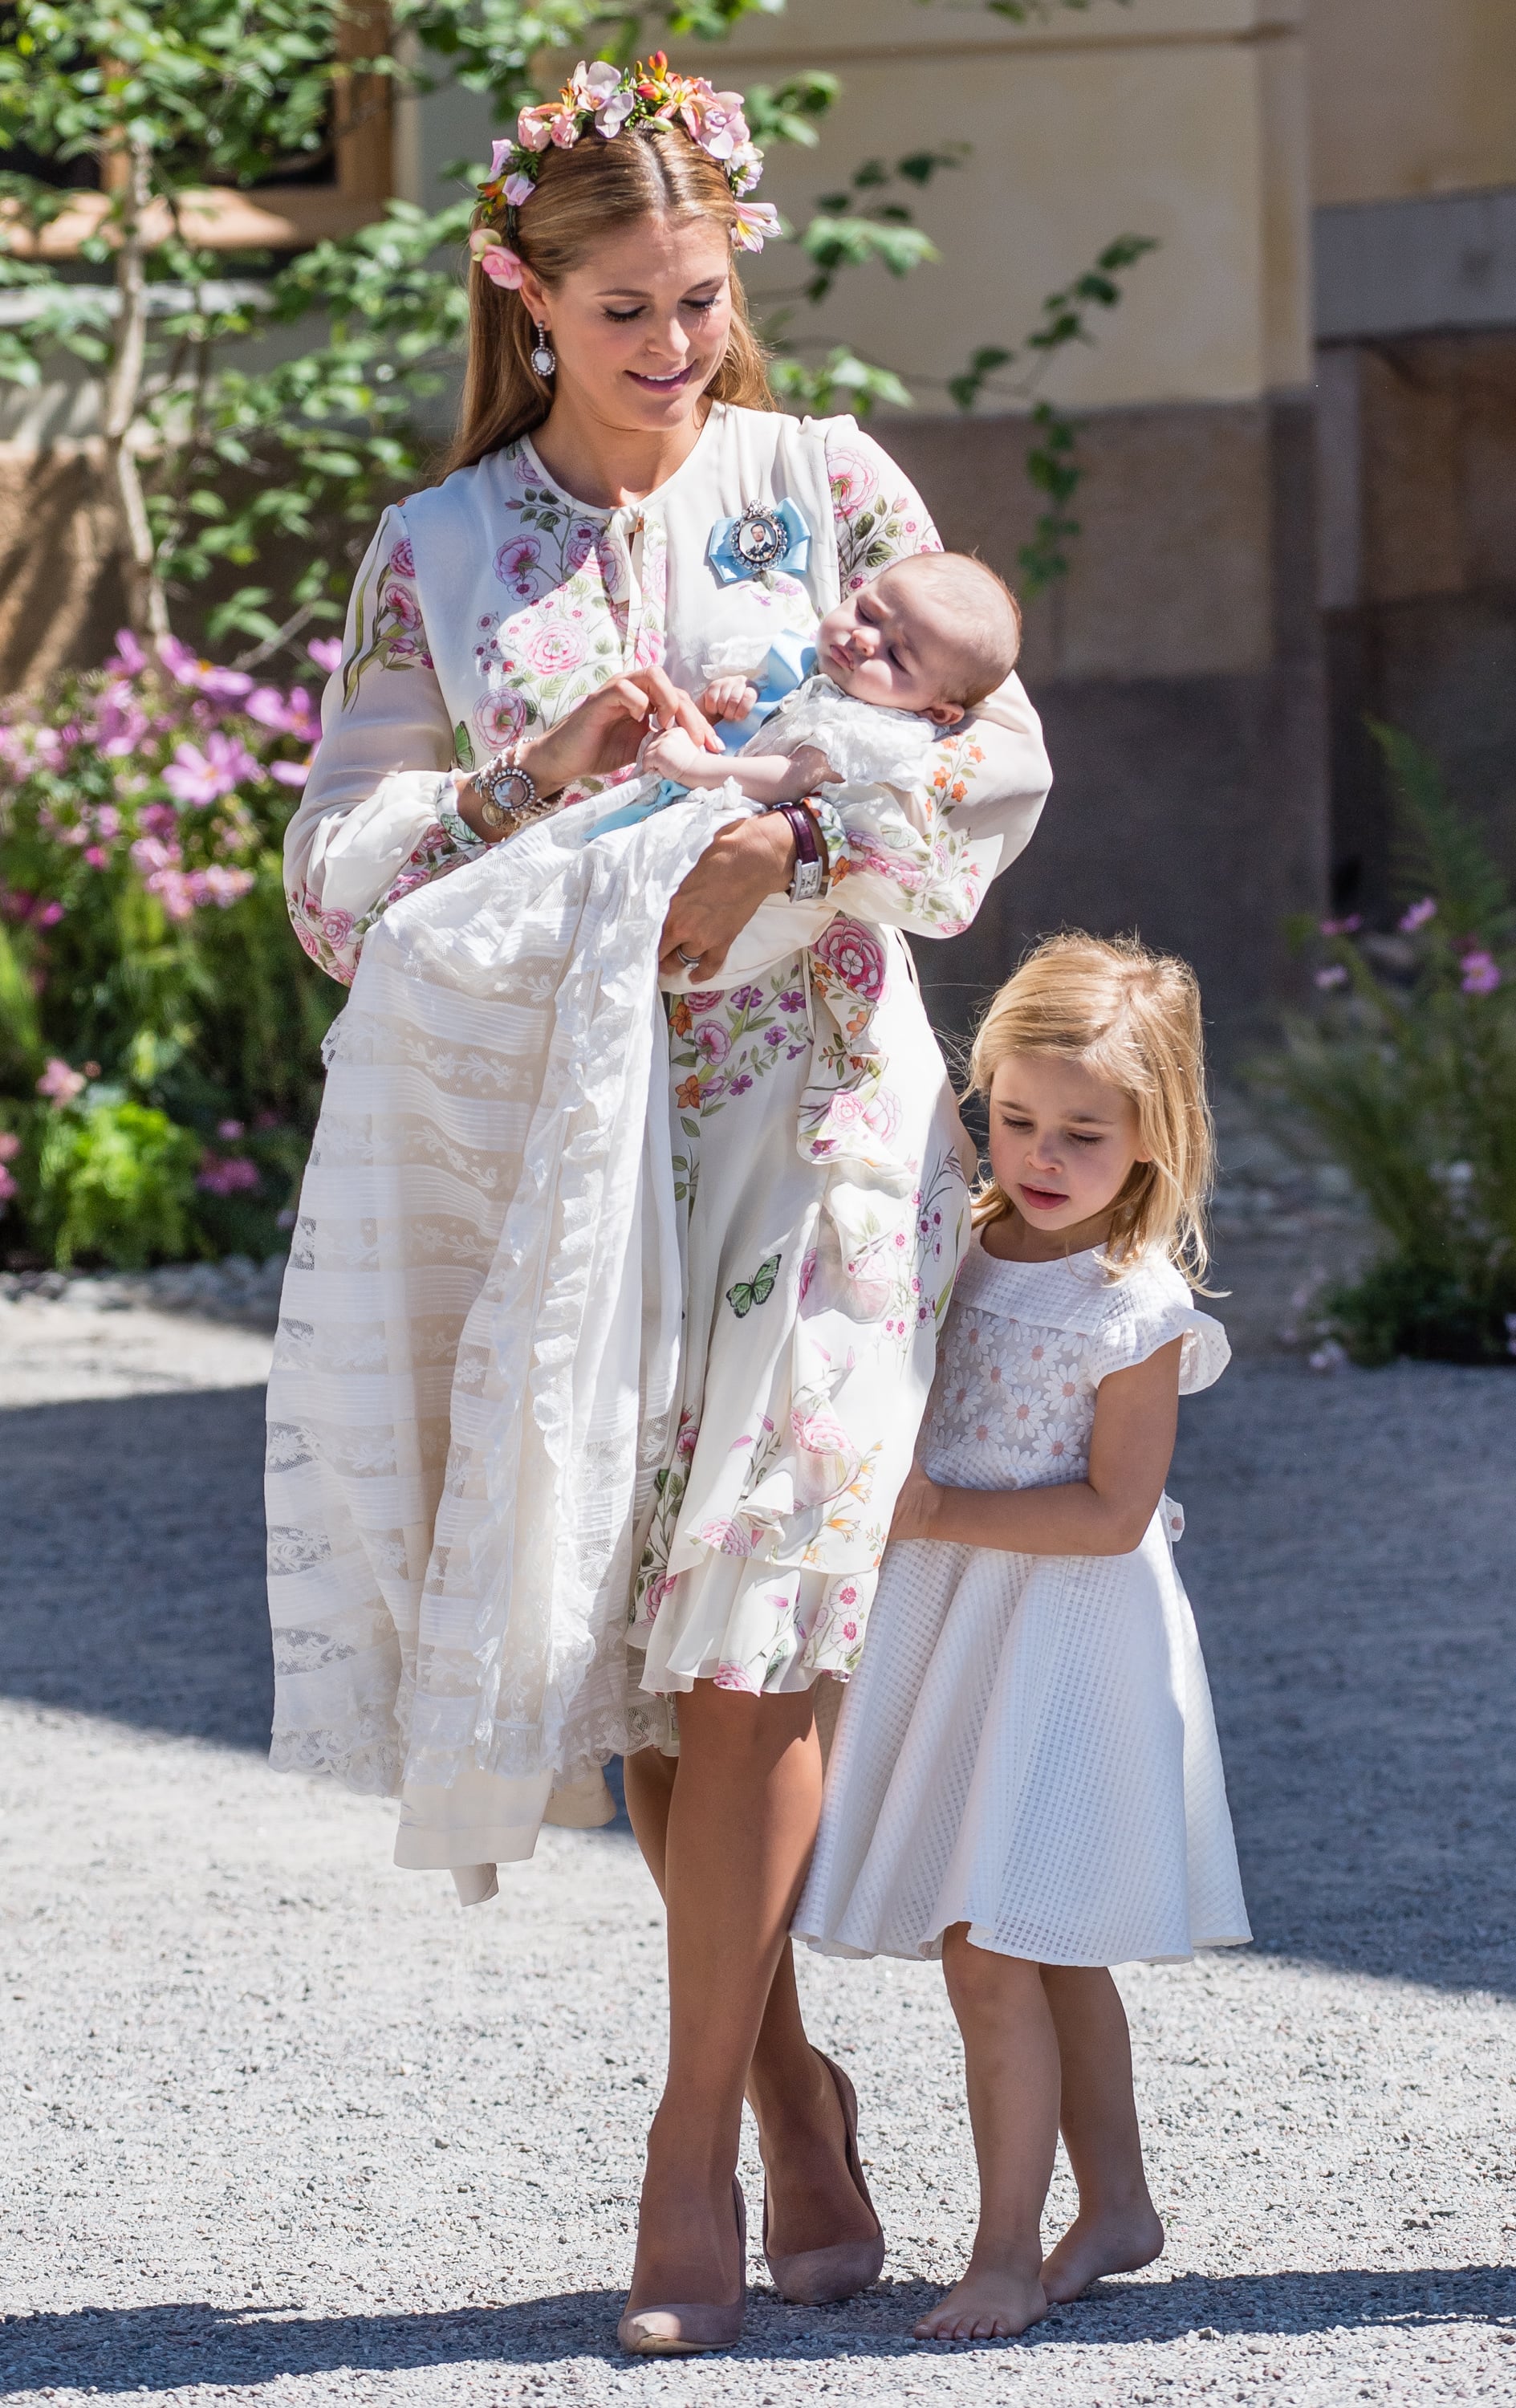 Princess Adrienne's Christening Portraits Released